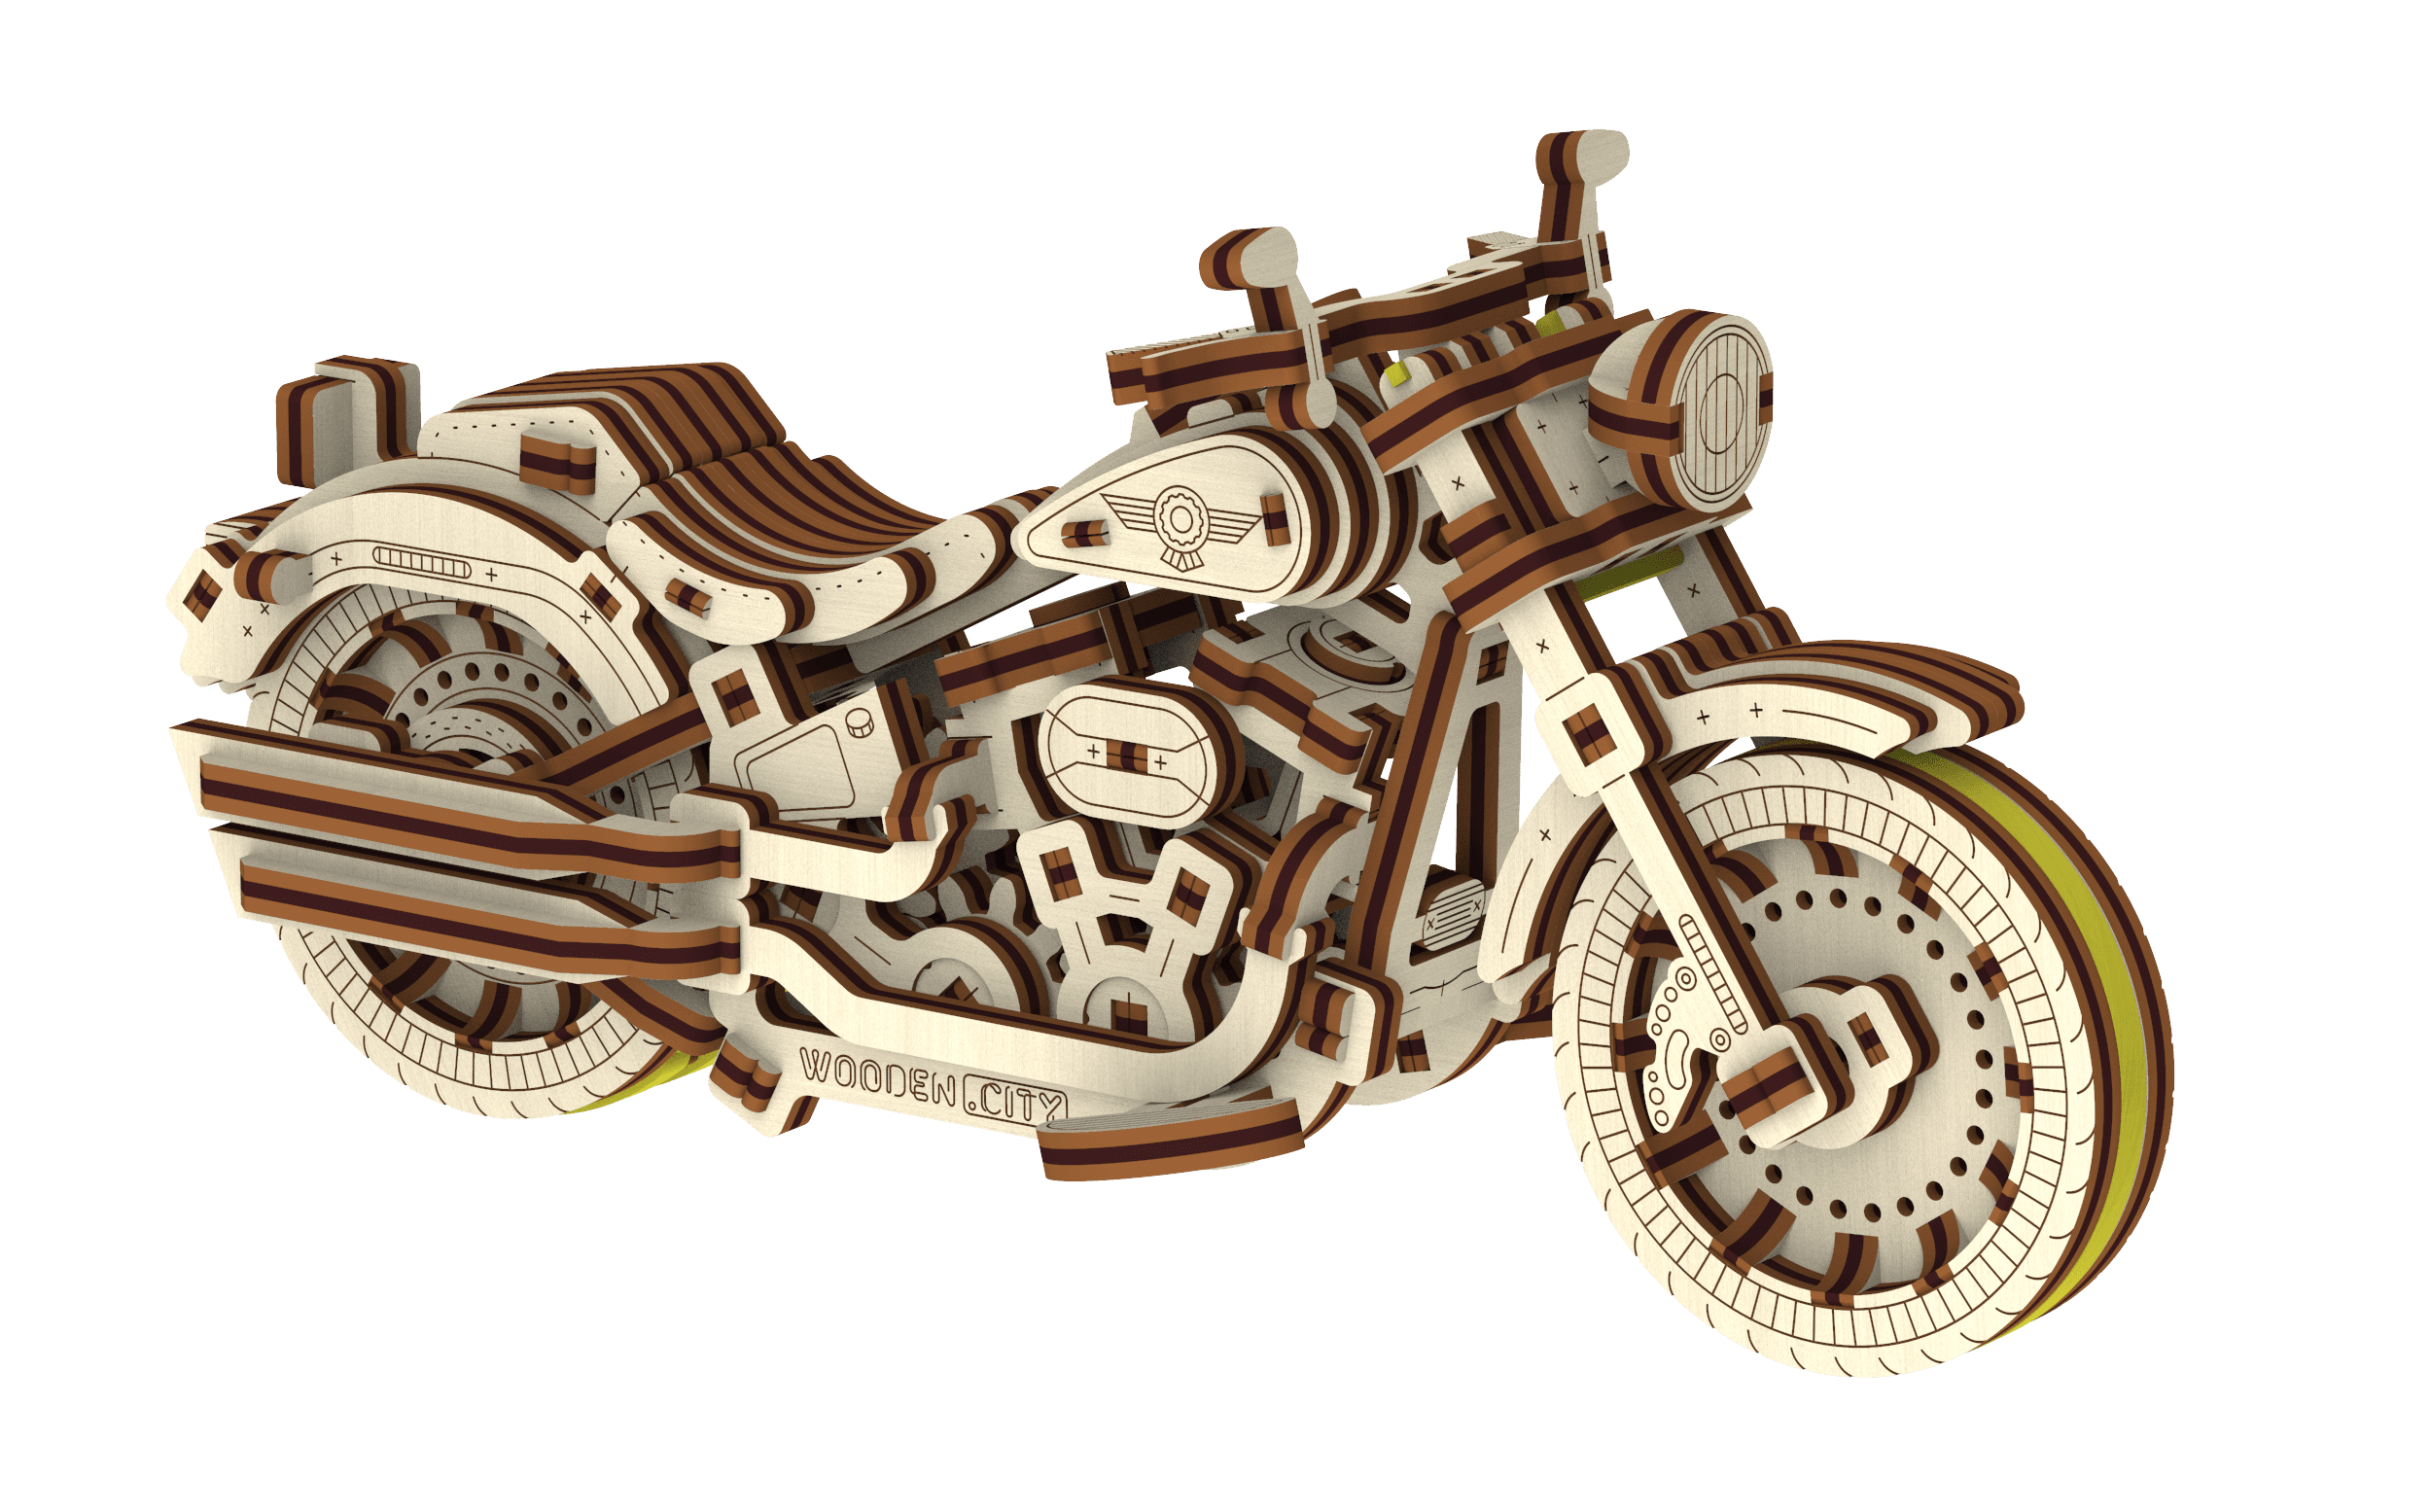 Wooden 3D Puzzle - Crusier V-Twin Motorcycle